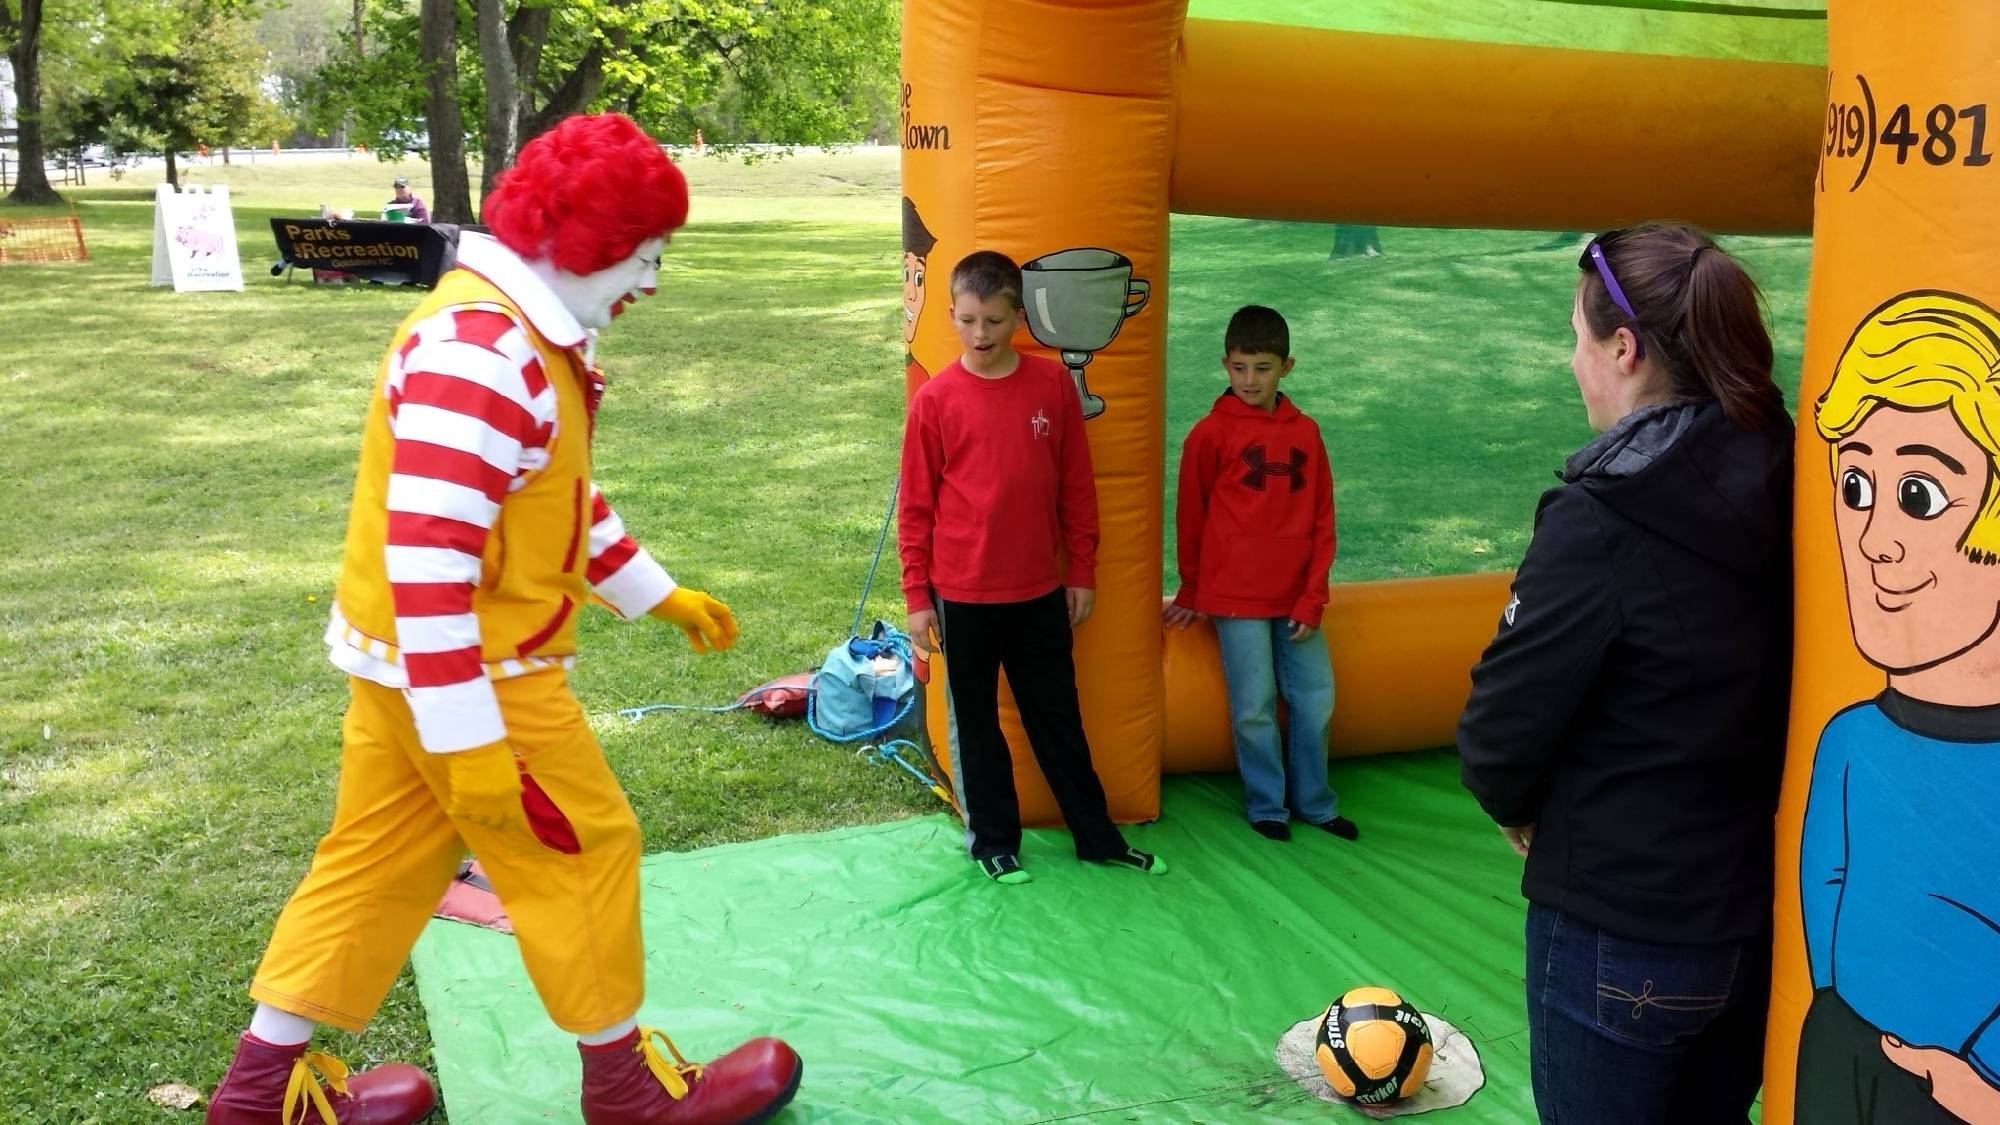 A famous clown tries his kicking skills on the Soccerama game rental